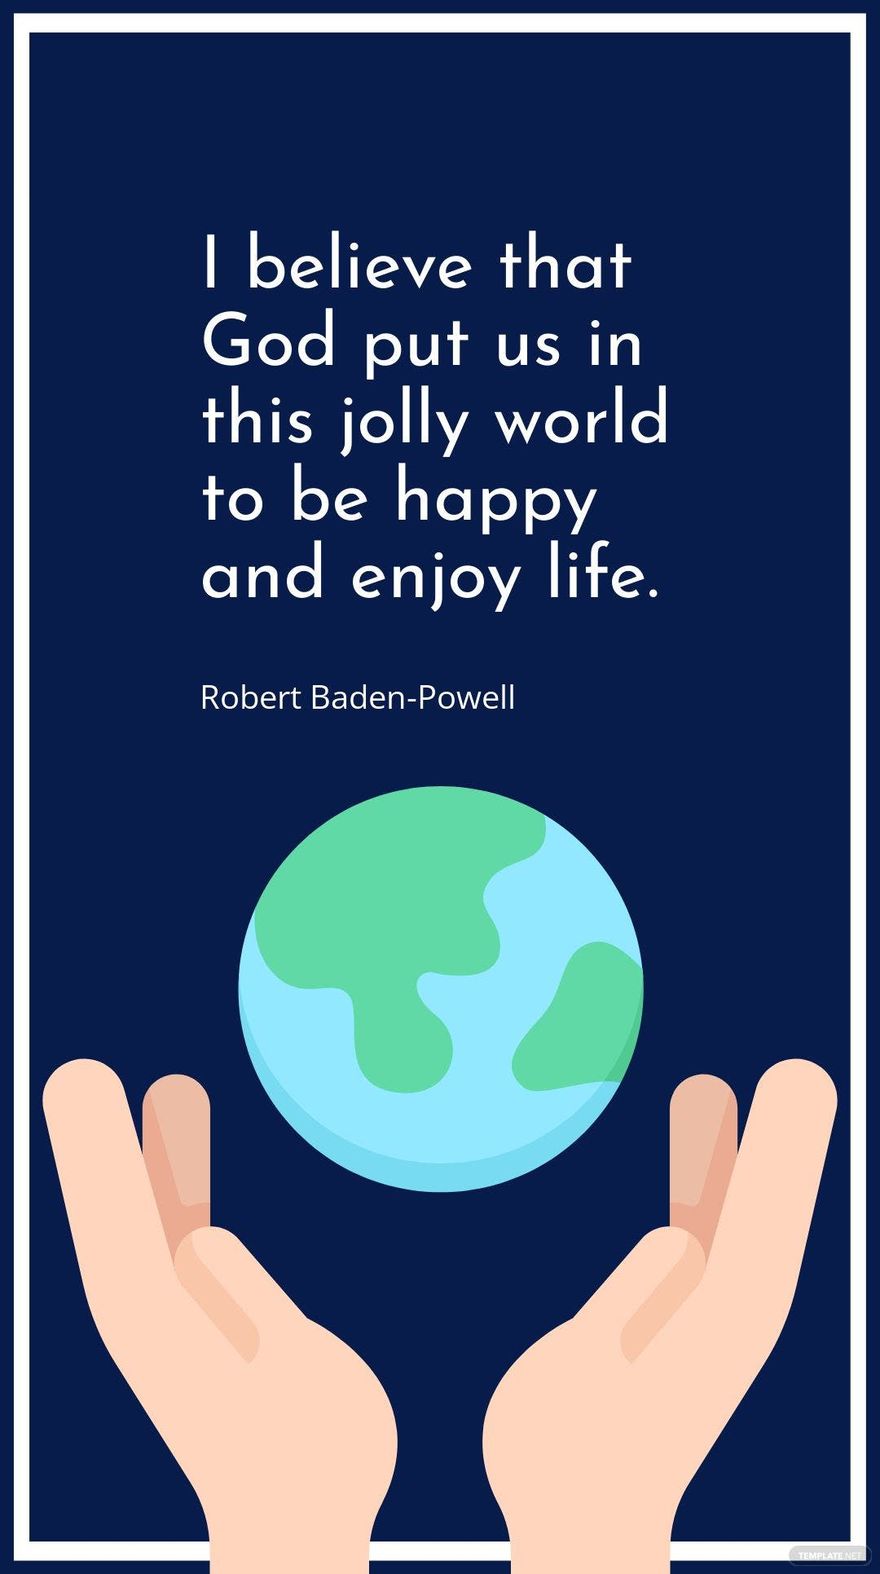 Robert Baden-Powell - I believe that God put us in this jolly world to be happy and enjoy life.